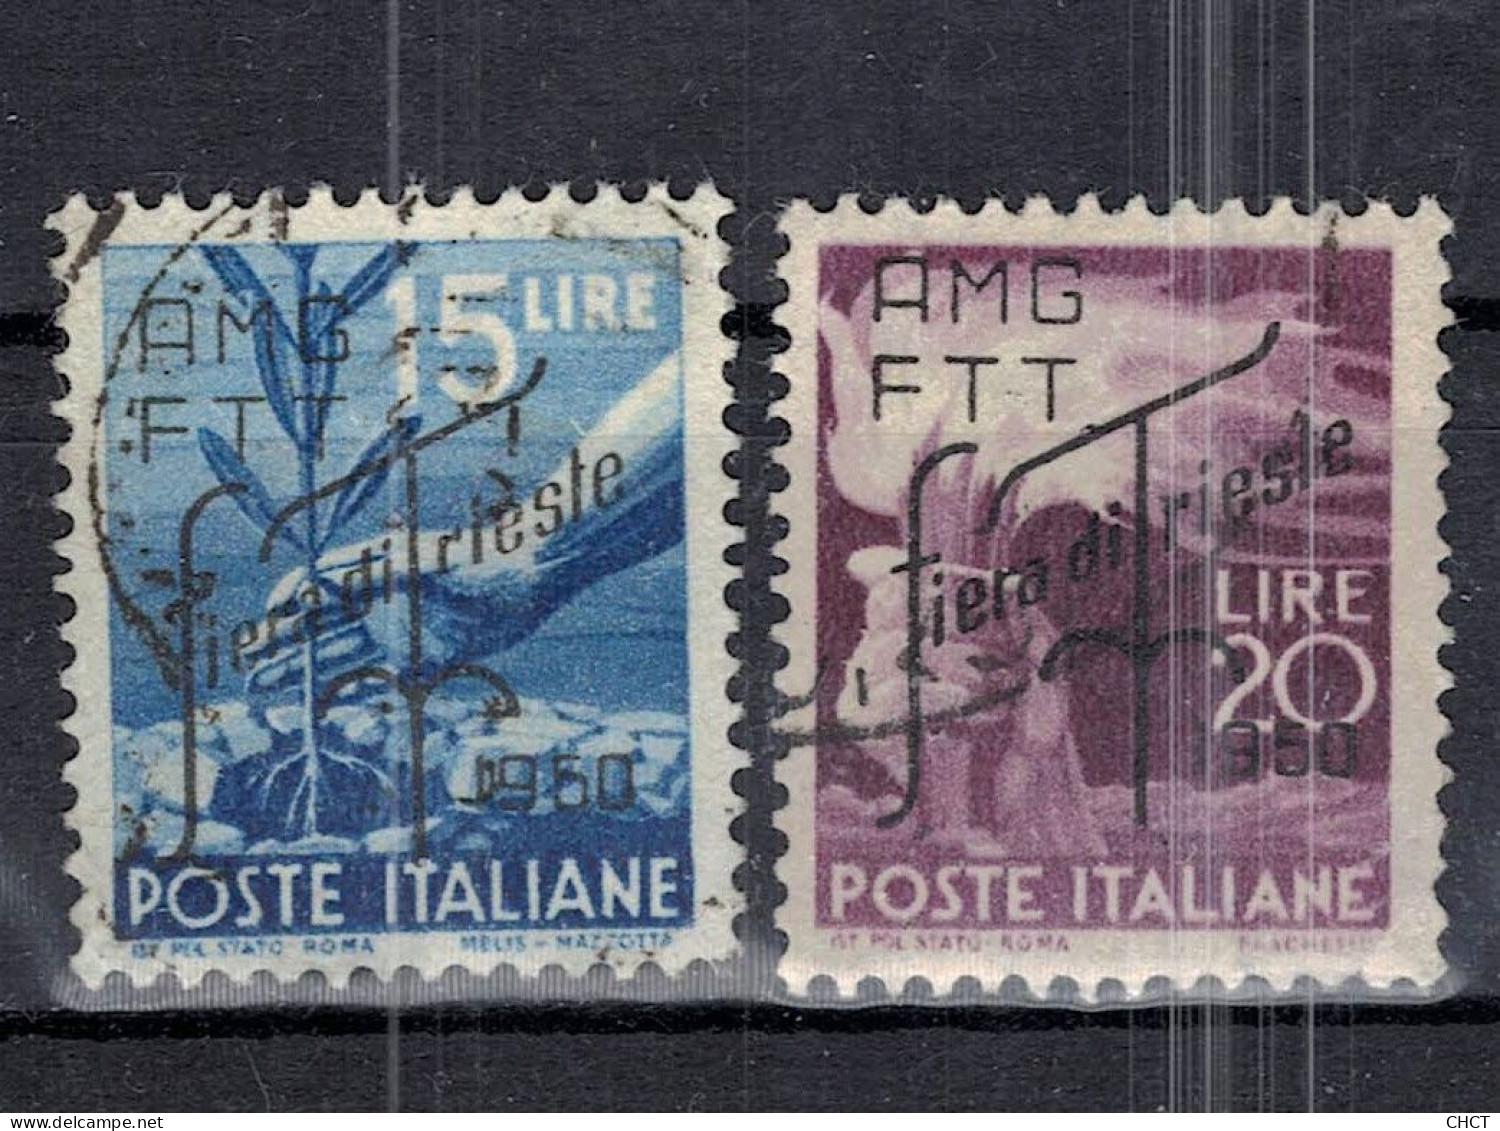 CHCT74 - Motives, AMG-FTT Overprint, Trieste A, 1950, Complete Series, Italy - Used